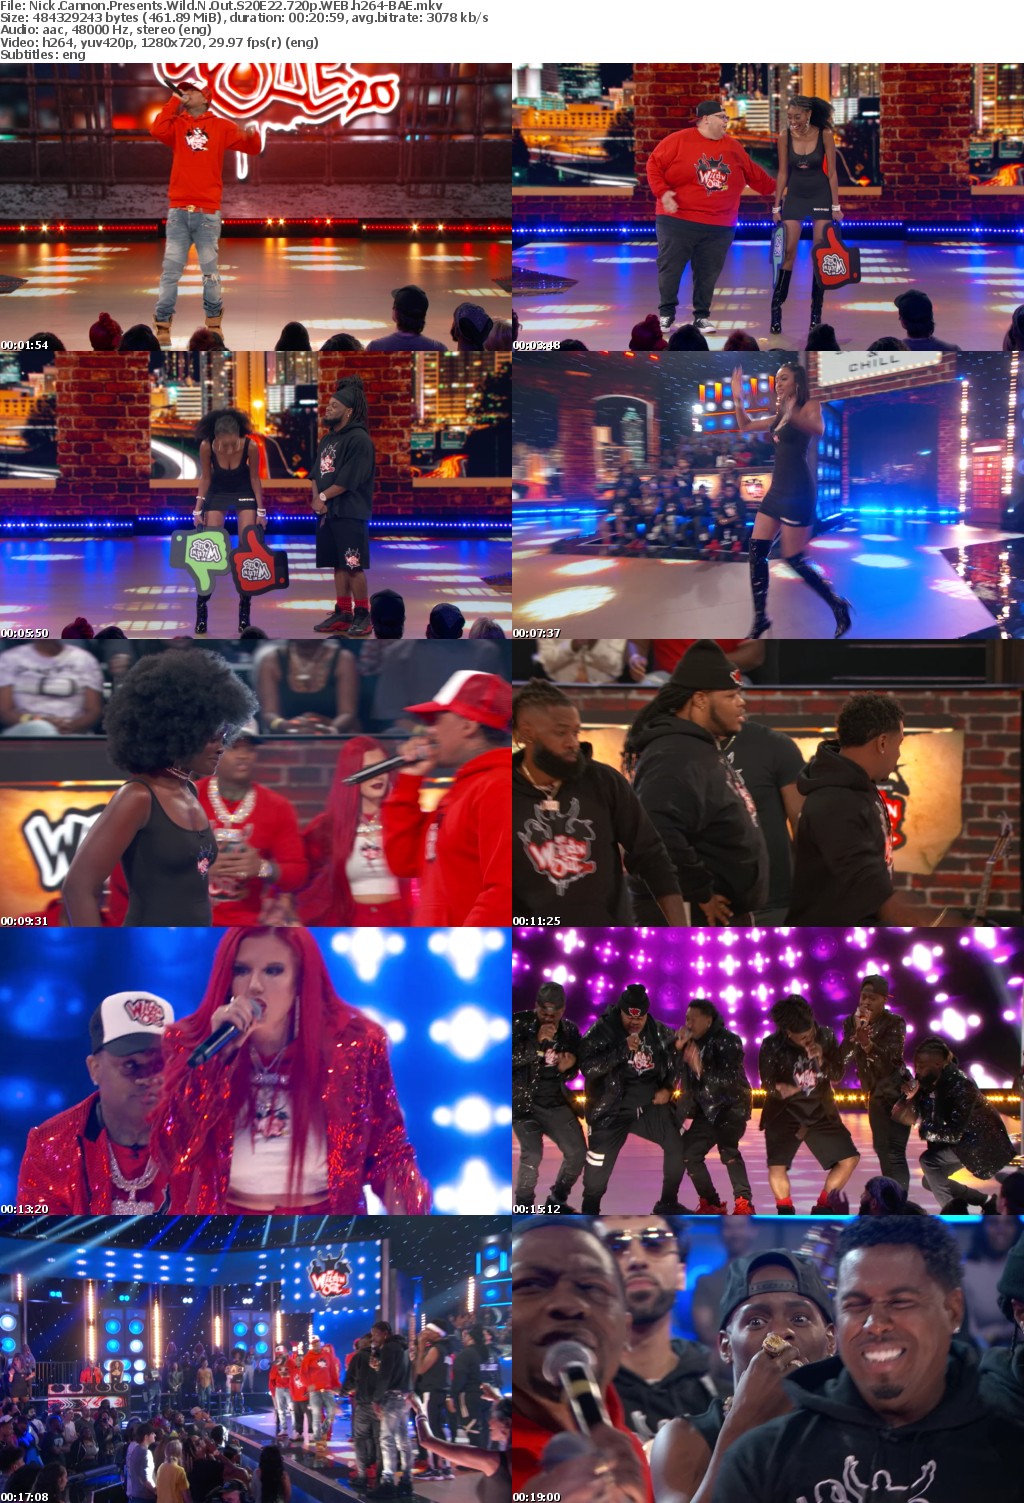 Nick Cannon Presents Wild N Out S20E22 720p WEB h264-BAE